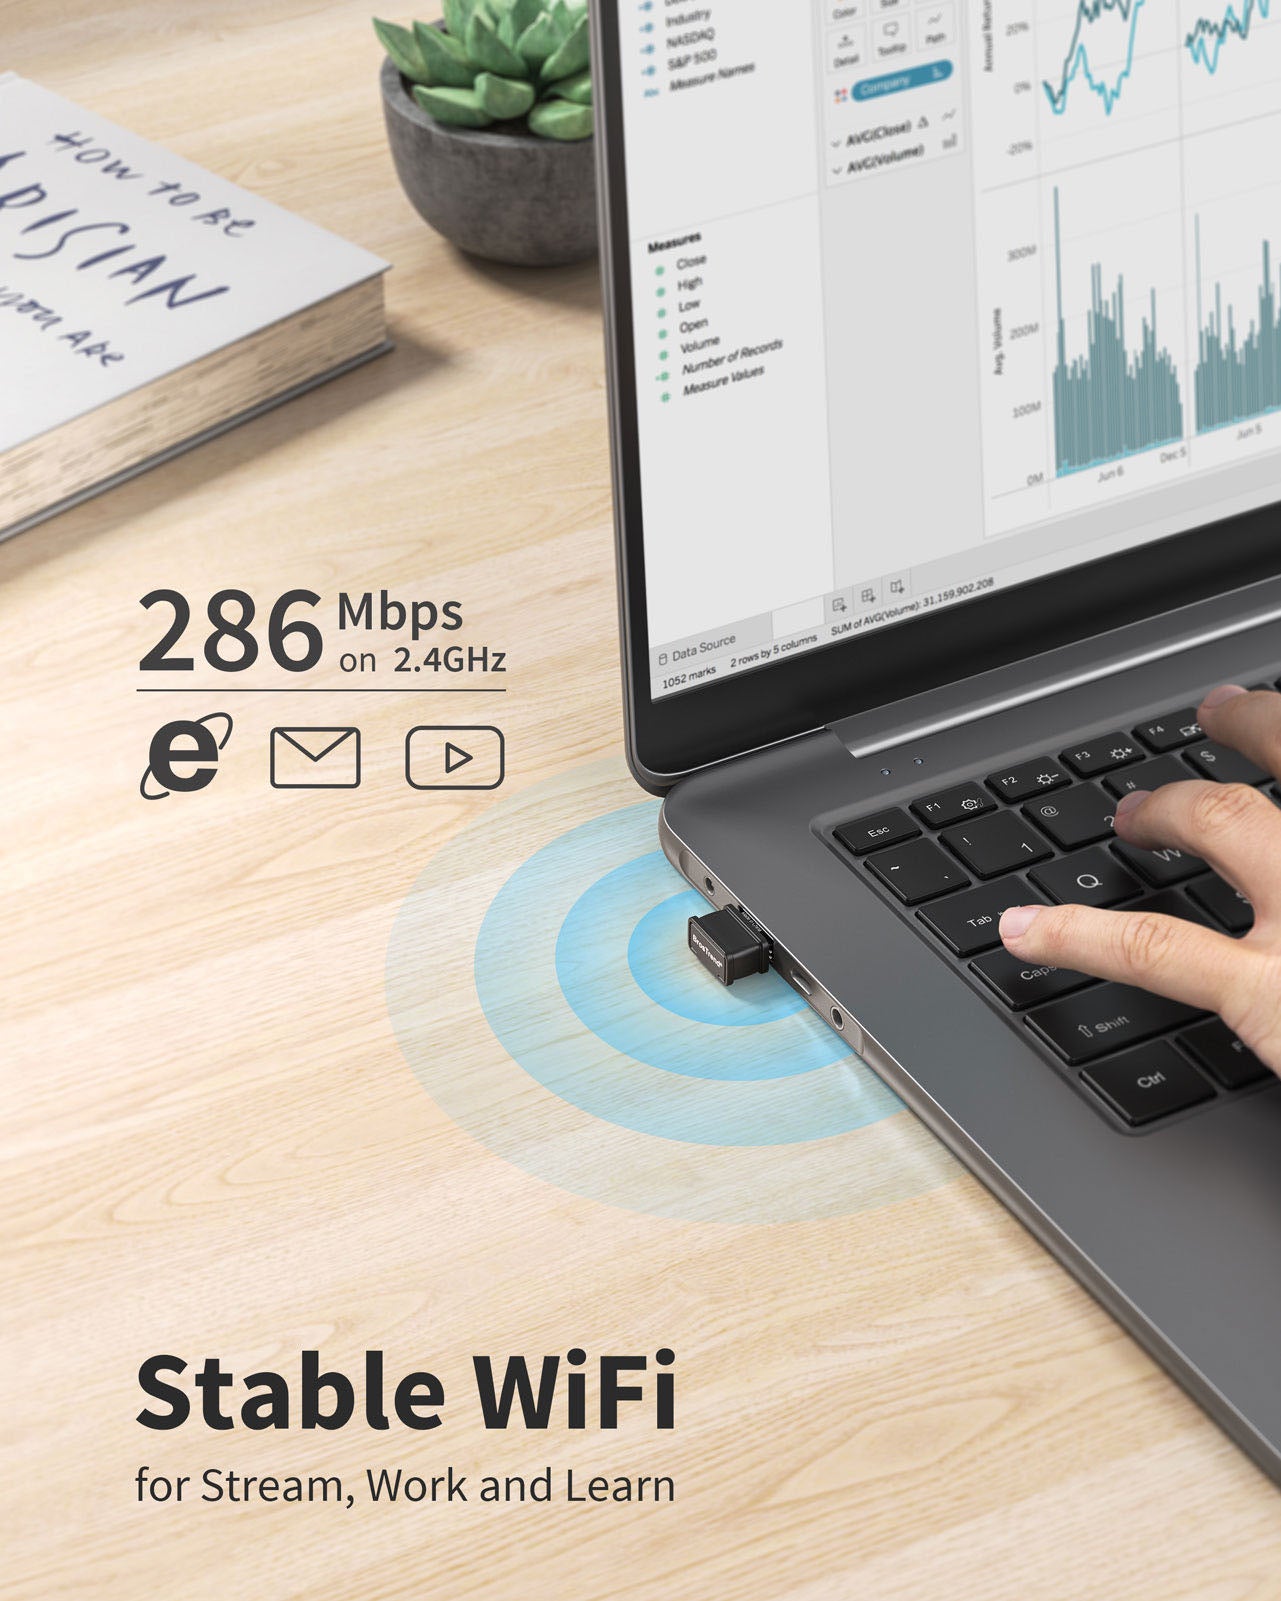 Nano WiFi 6 USB Adapter Delivers Up to 286 Mbps Connection on 2.4GHz Wireless Band Fast for Surfing Working and Streaming